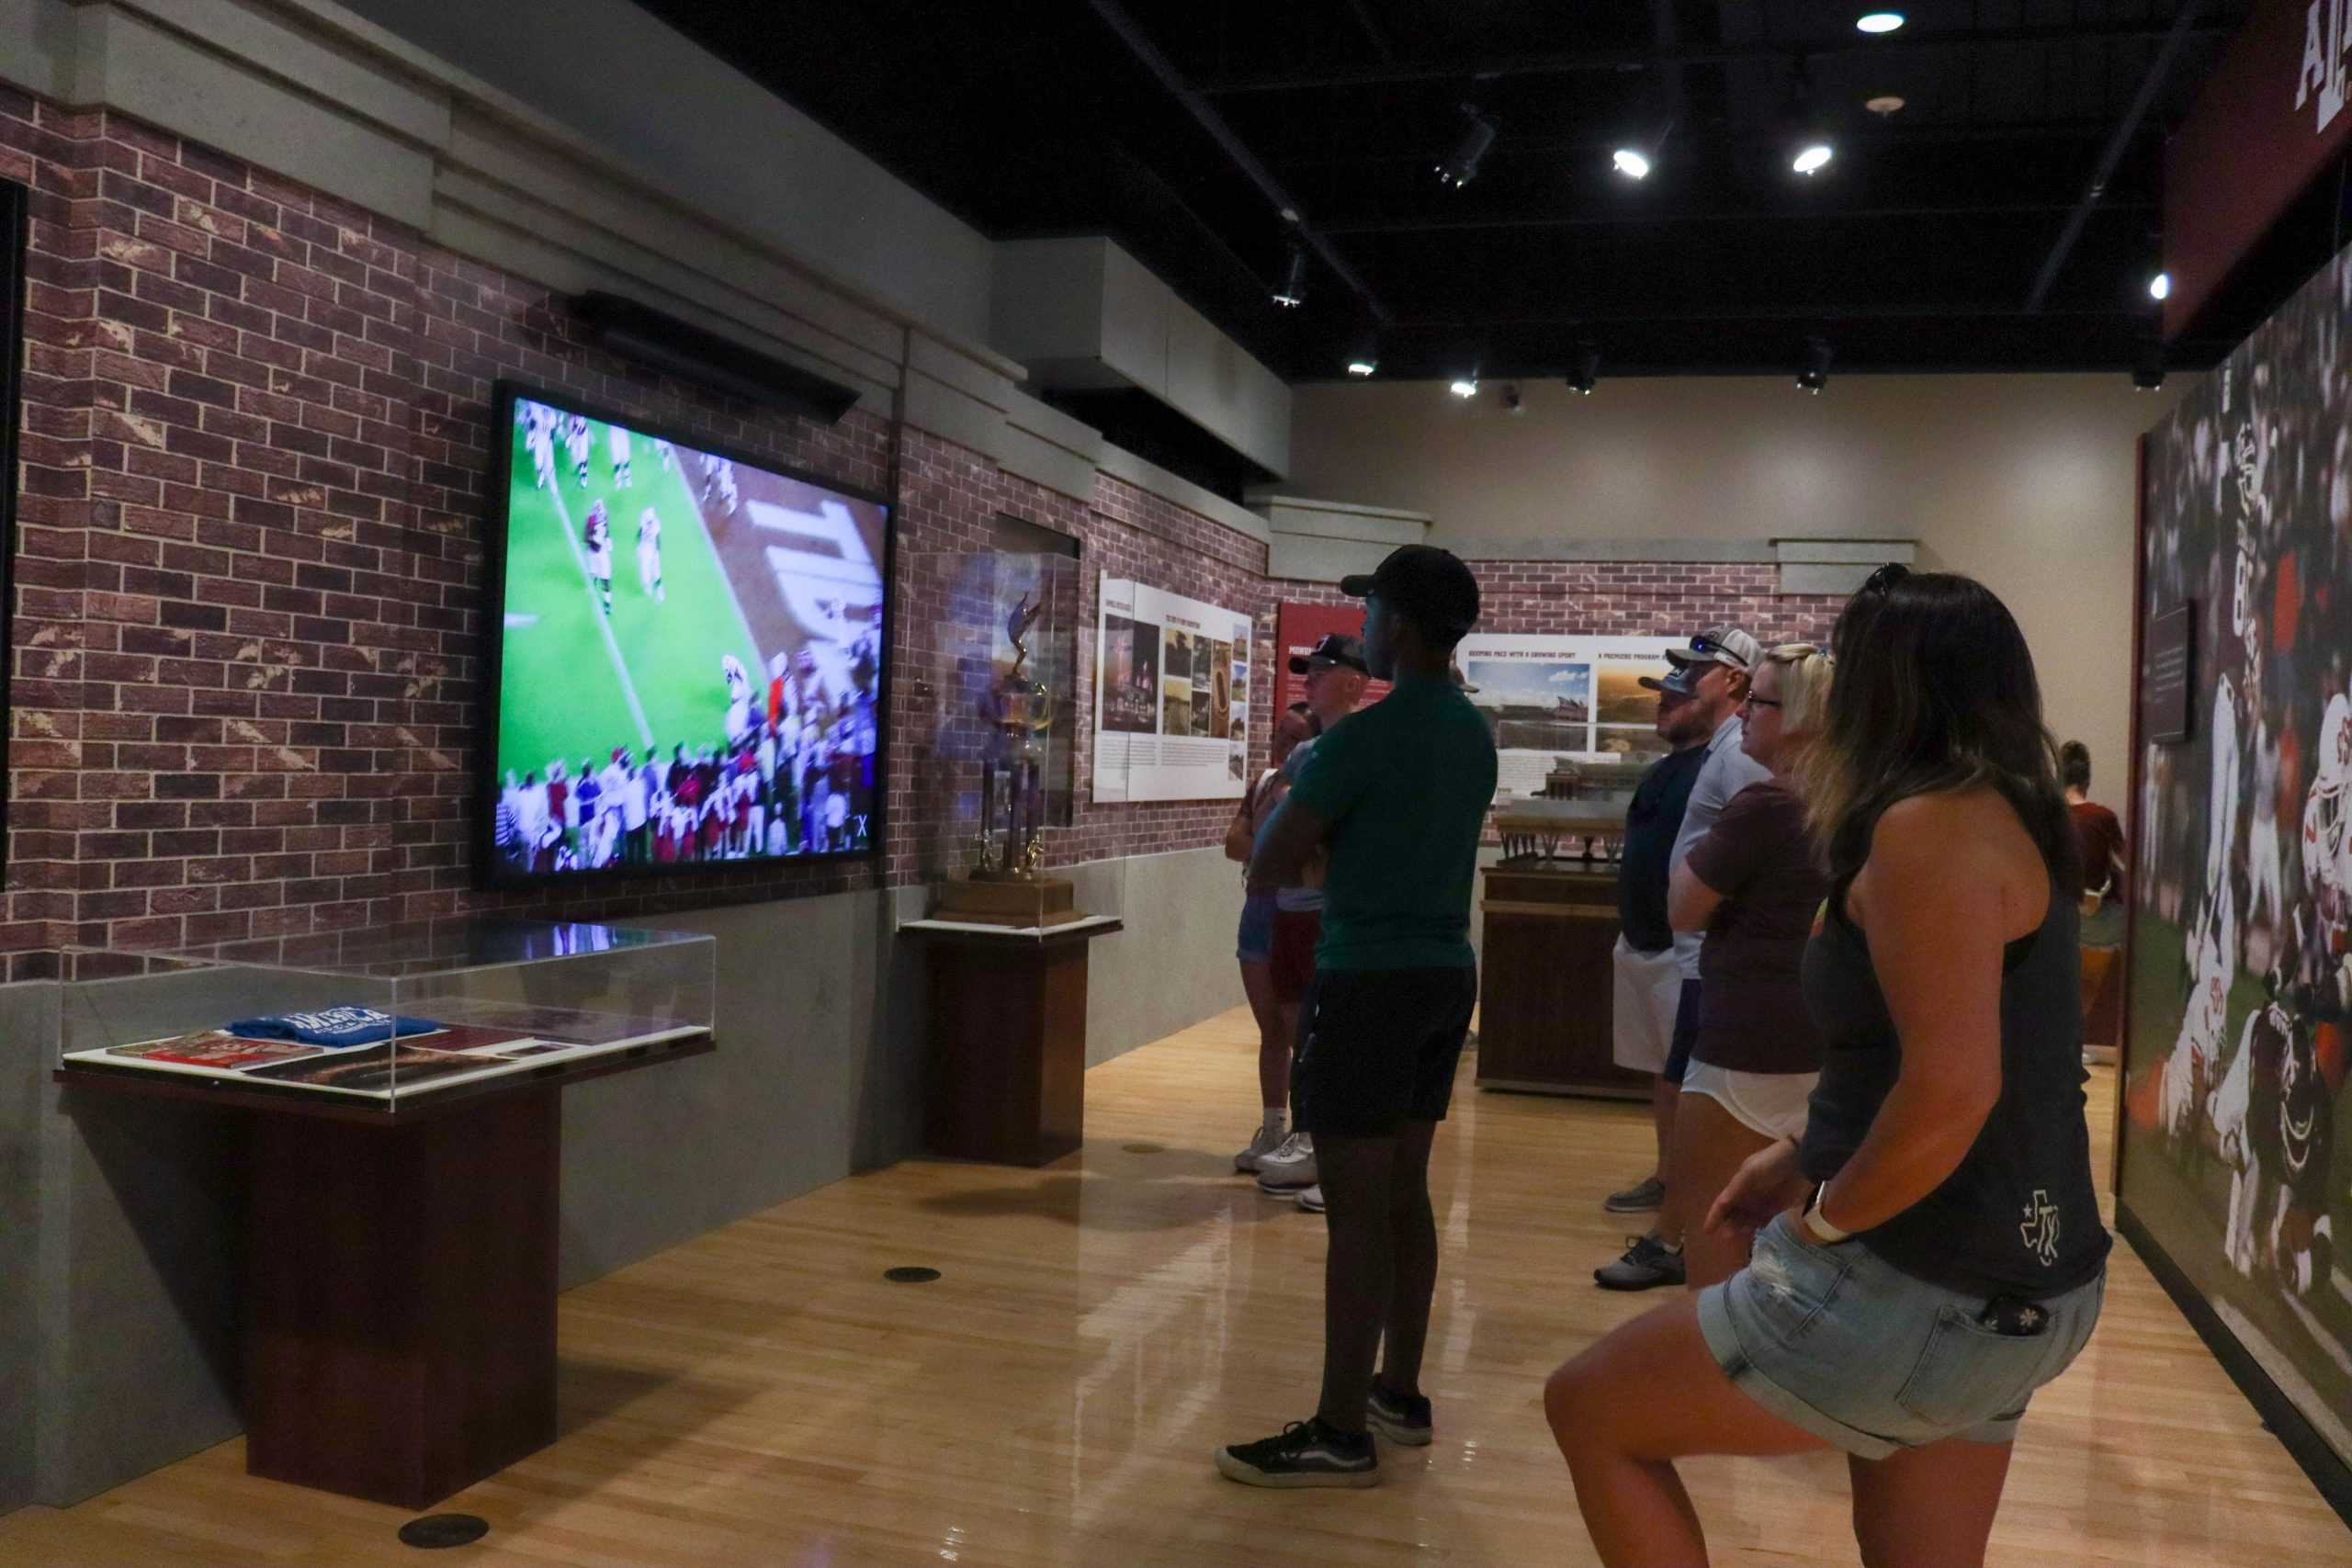 Aggie+football+exhibit+boasts+rich+history+at+Bush+Library+%26+Museum